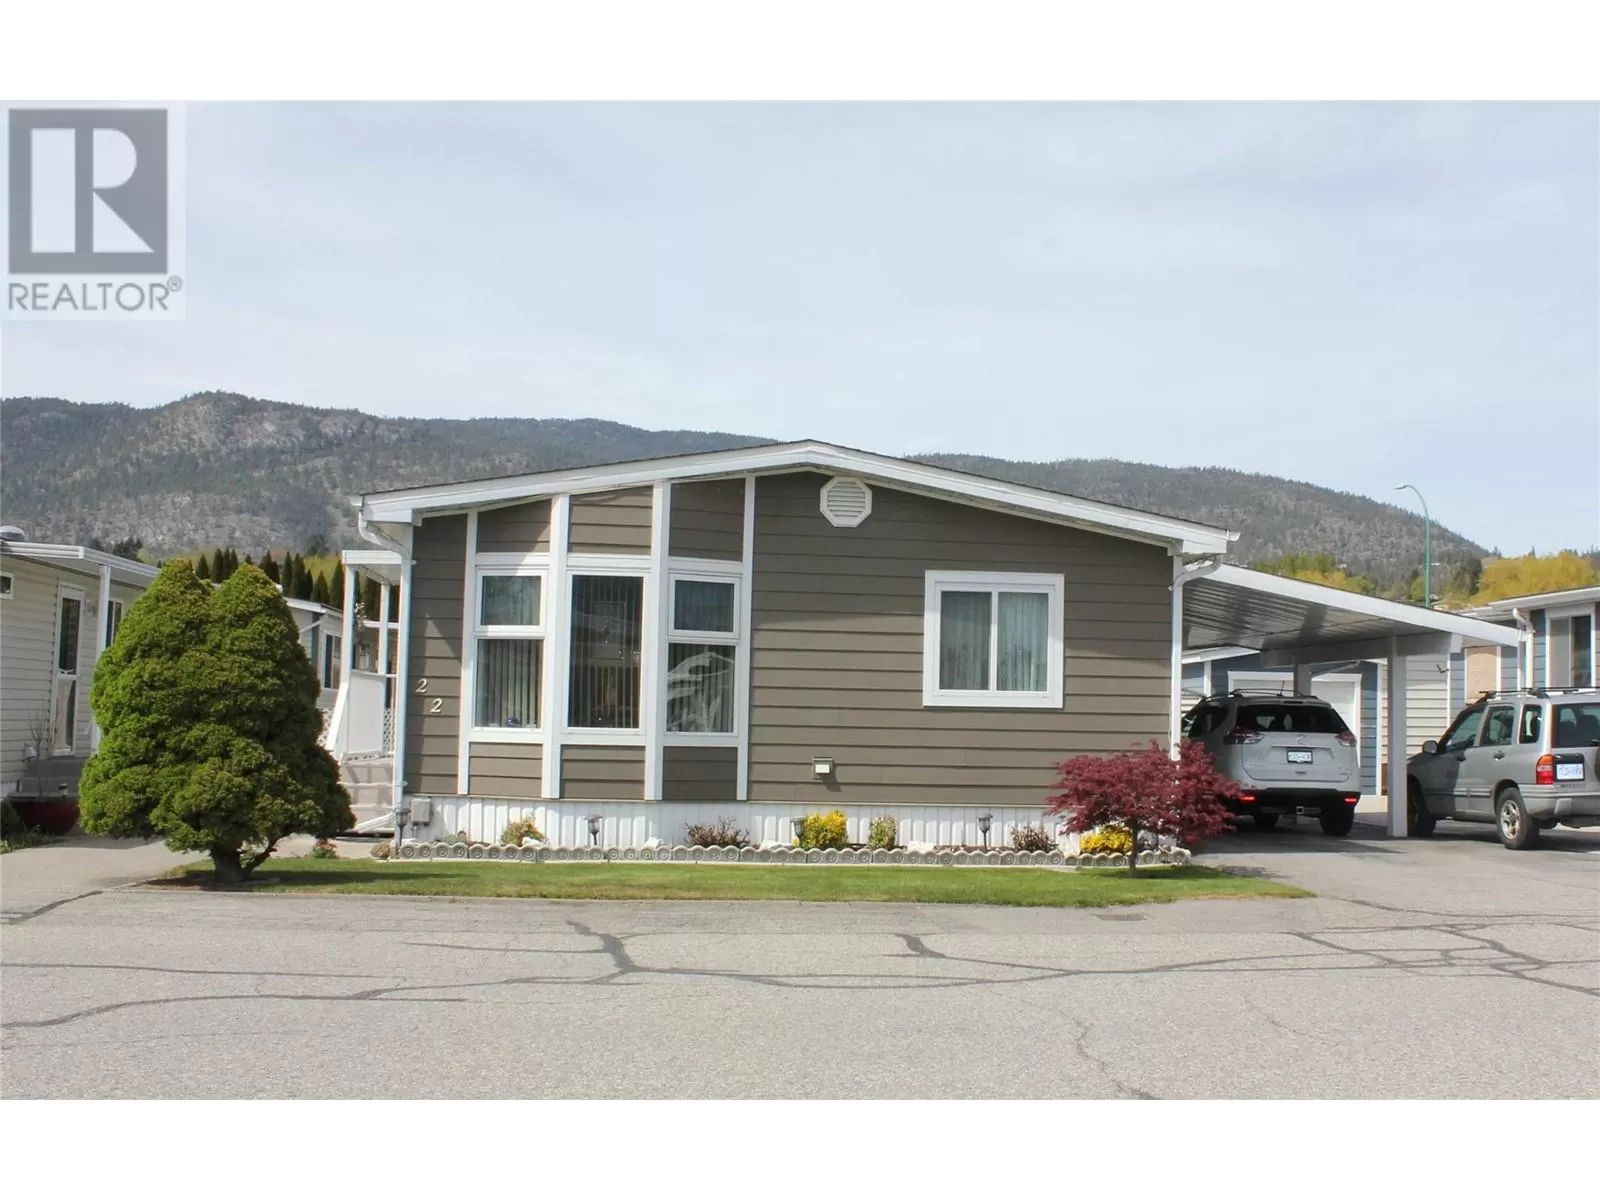 Manufactured Home for rent: 999 Burnaby Avenue Unit# 22, Penticton, British Columbia V2A 1G7